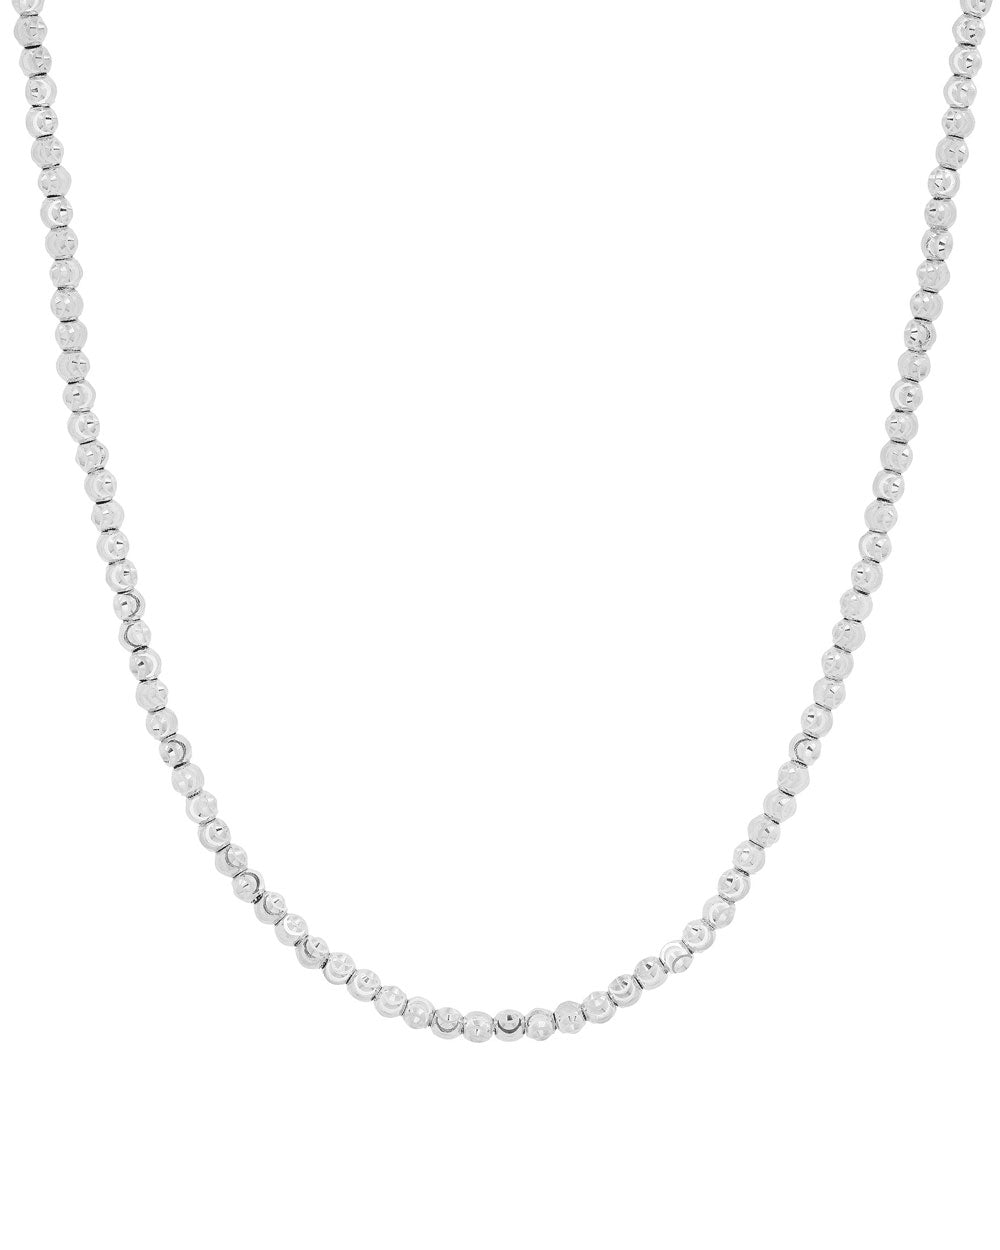 White Gold Diamond Cut Beaded Necklace